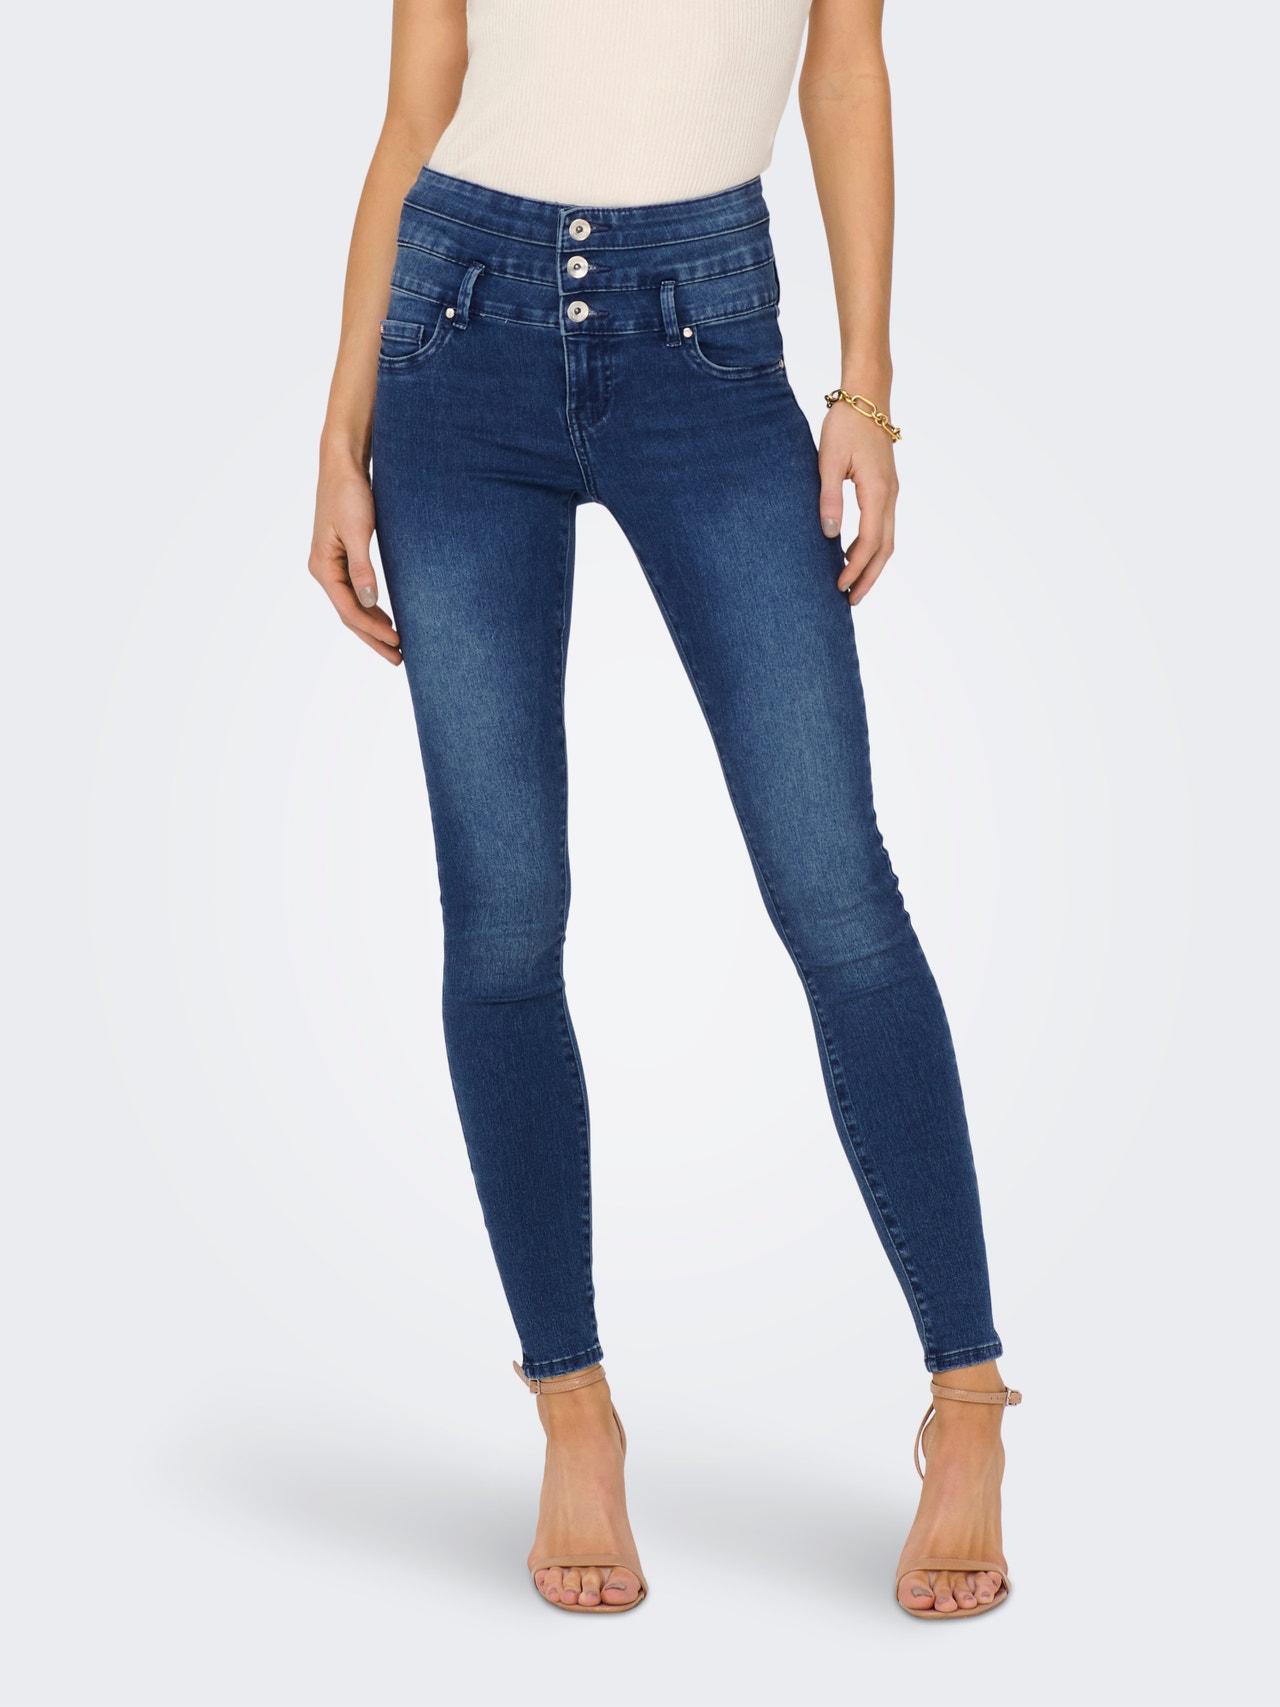 https://images.only.com/15229245/4197397/003/only-skinnyfithighwaistjeans-blue.jpg?v=0a61292ad9ea11ba1906d10a101ba96f&format=webp&width=1280&quality=90&key=25-0-3